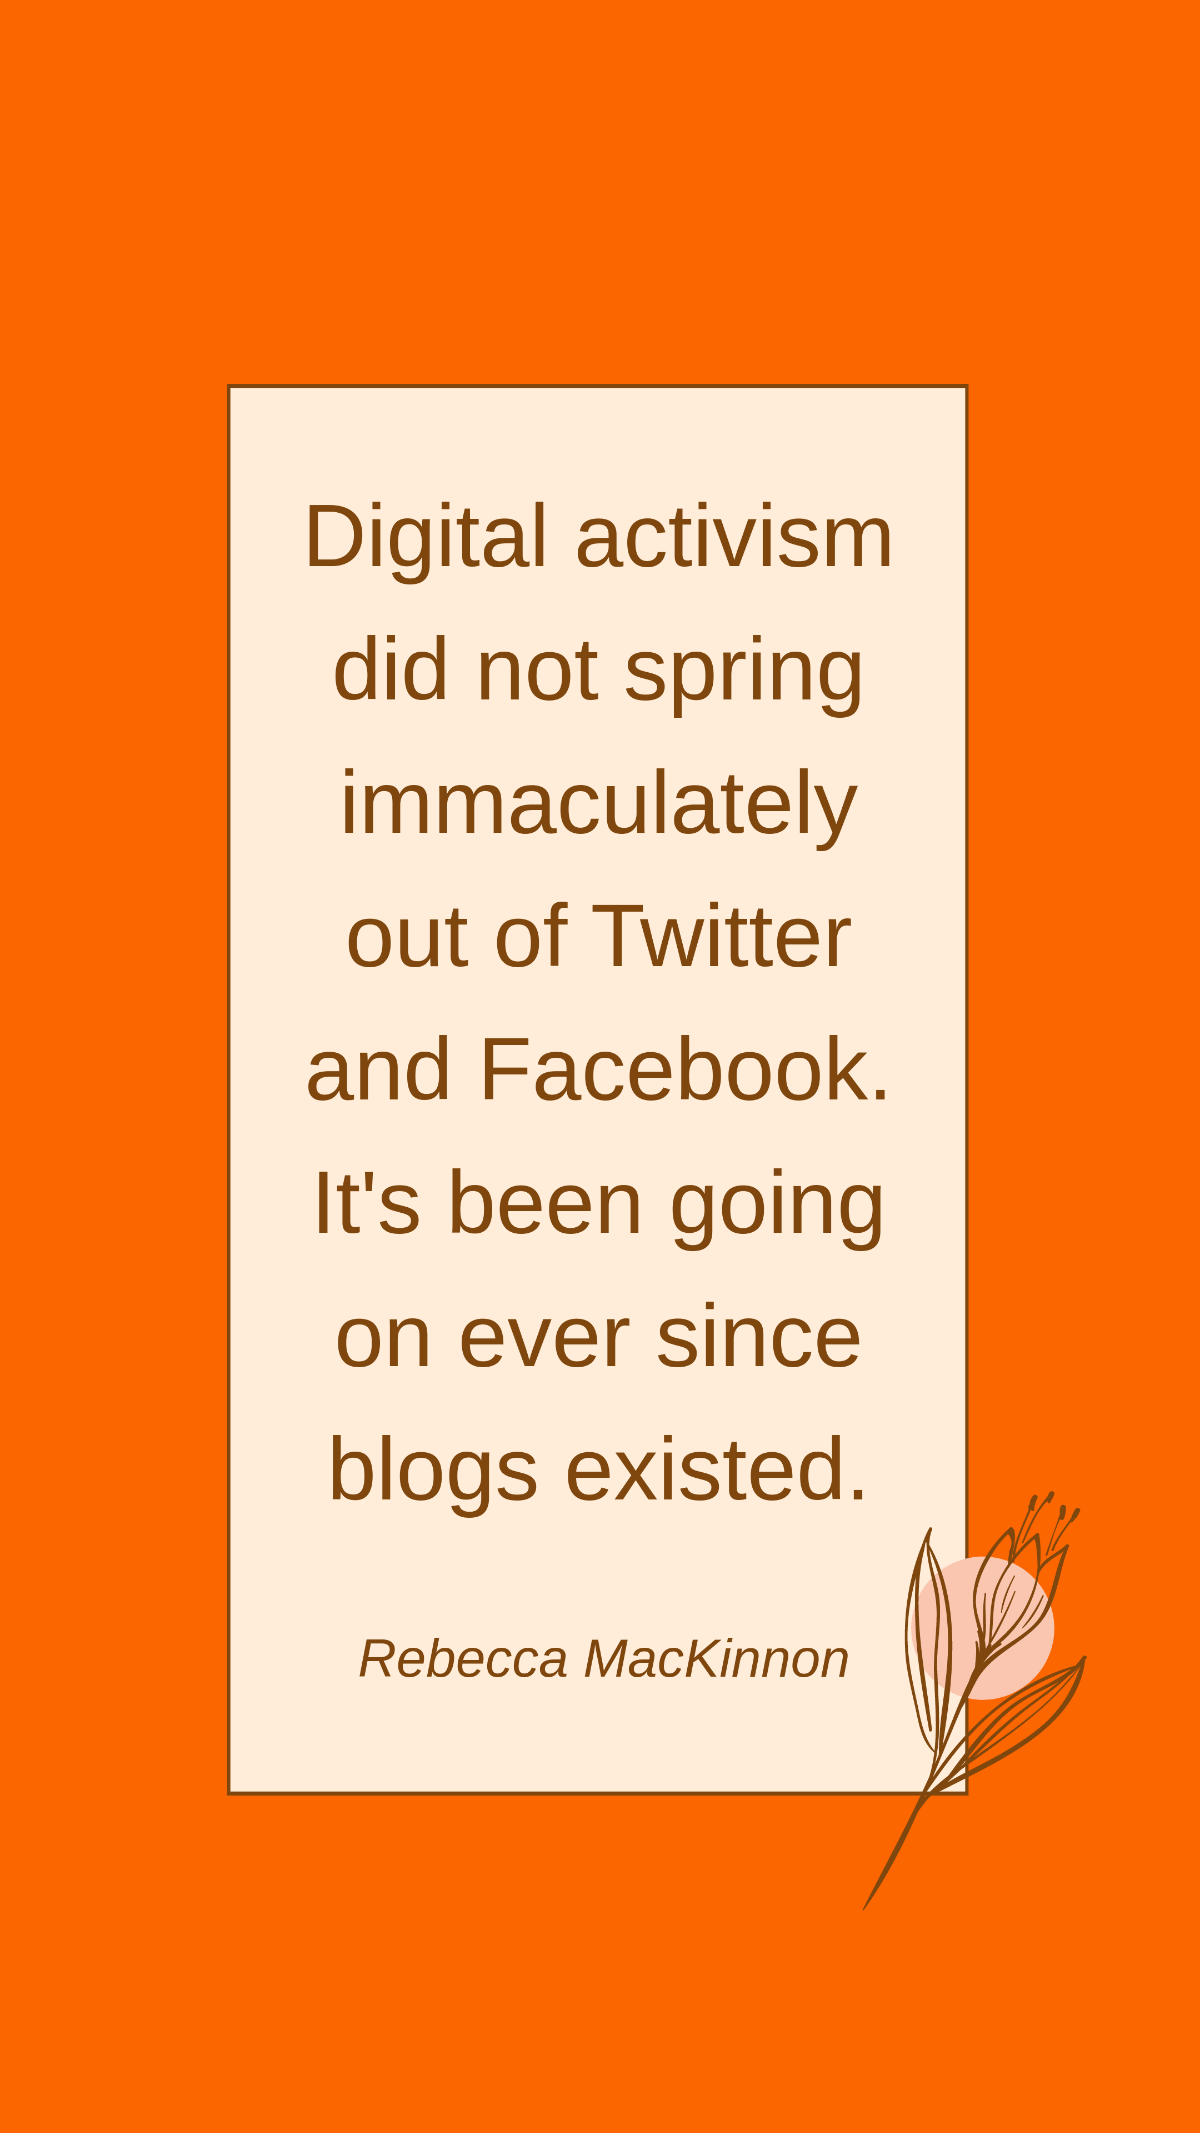 Rebecca MacKinnon - Digital activism did not spring immaculately out of Twitter and Facebook. It's been going on ever since blogs existed. Template